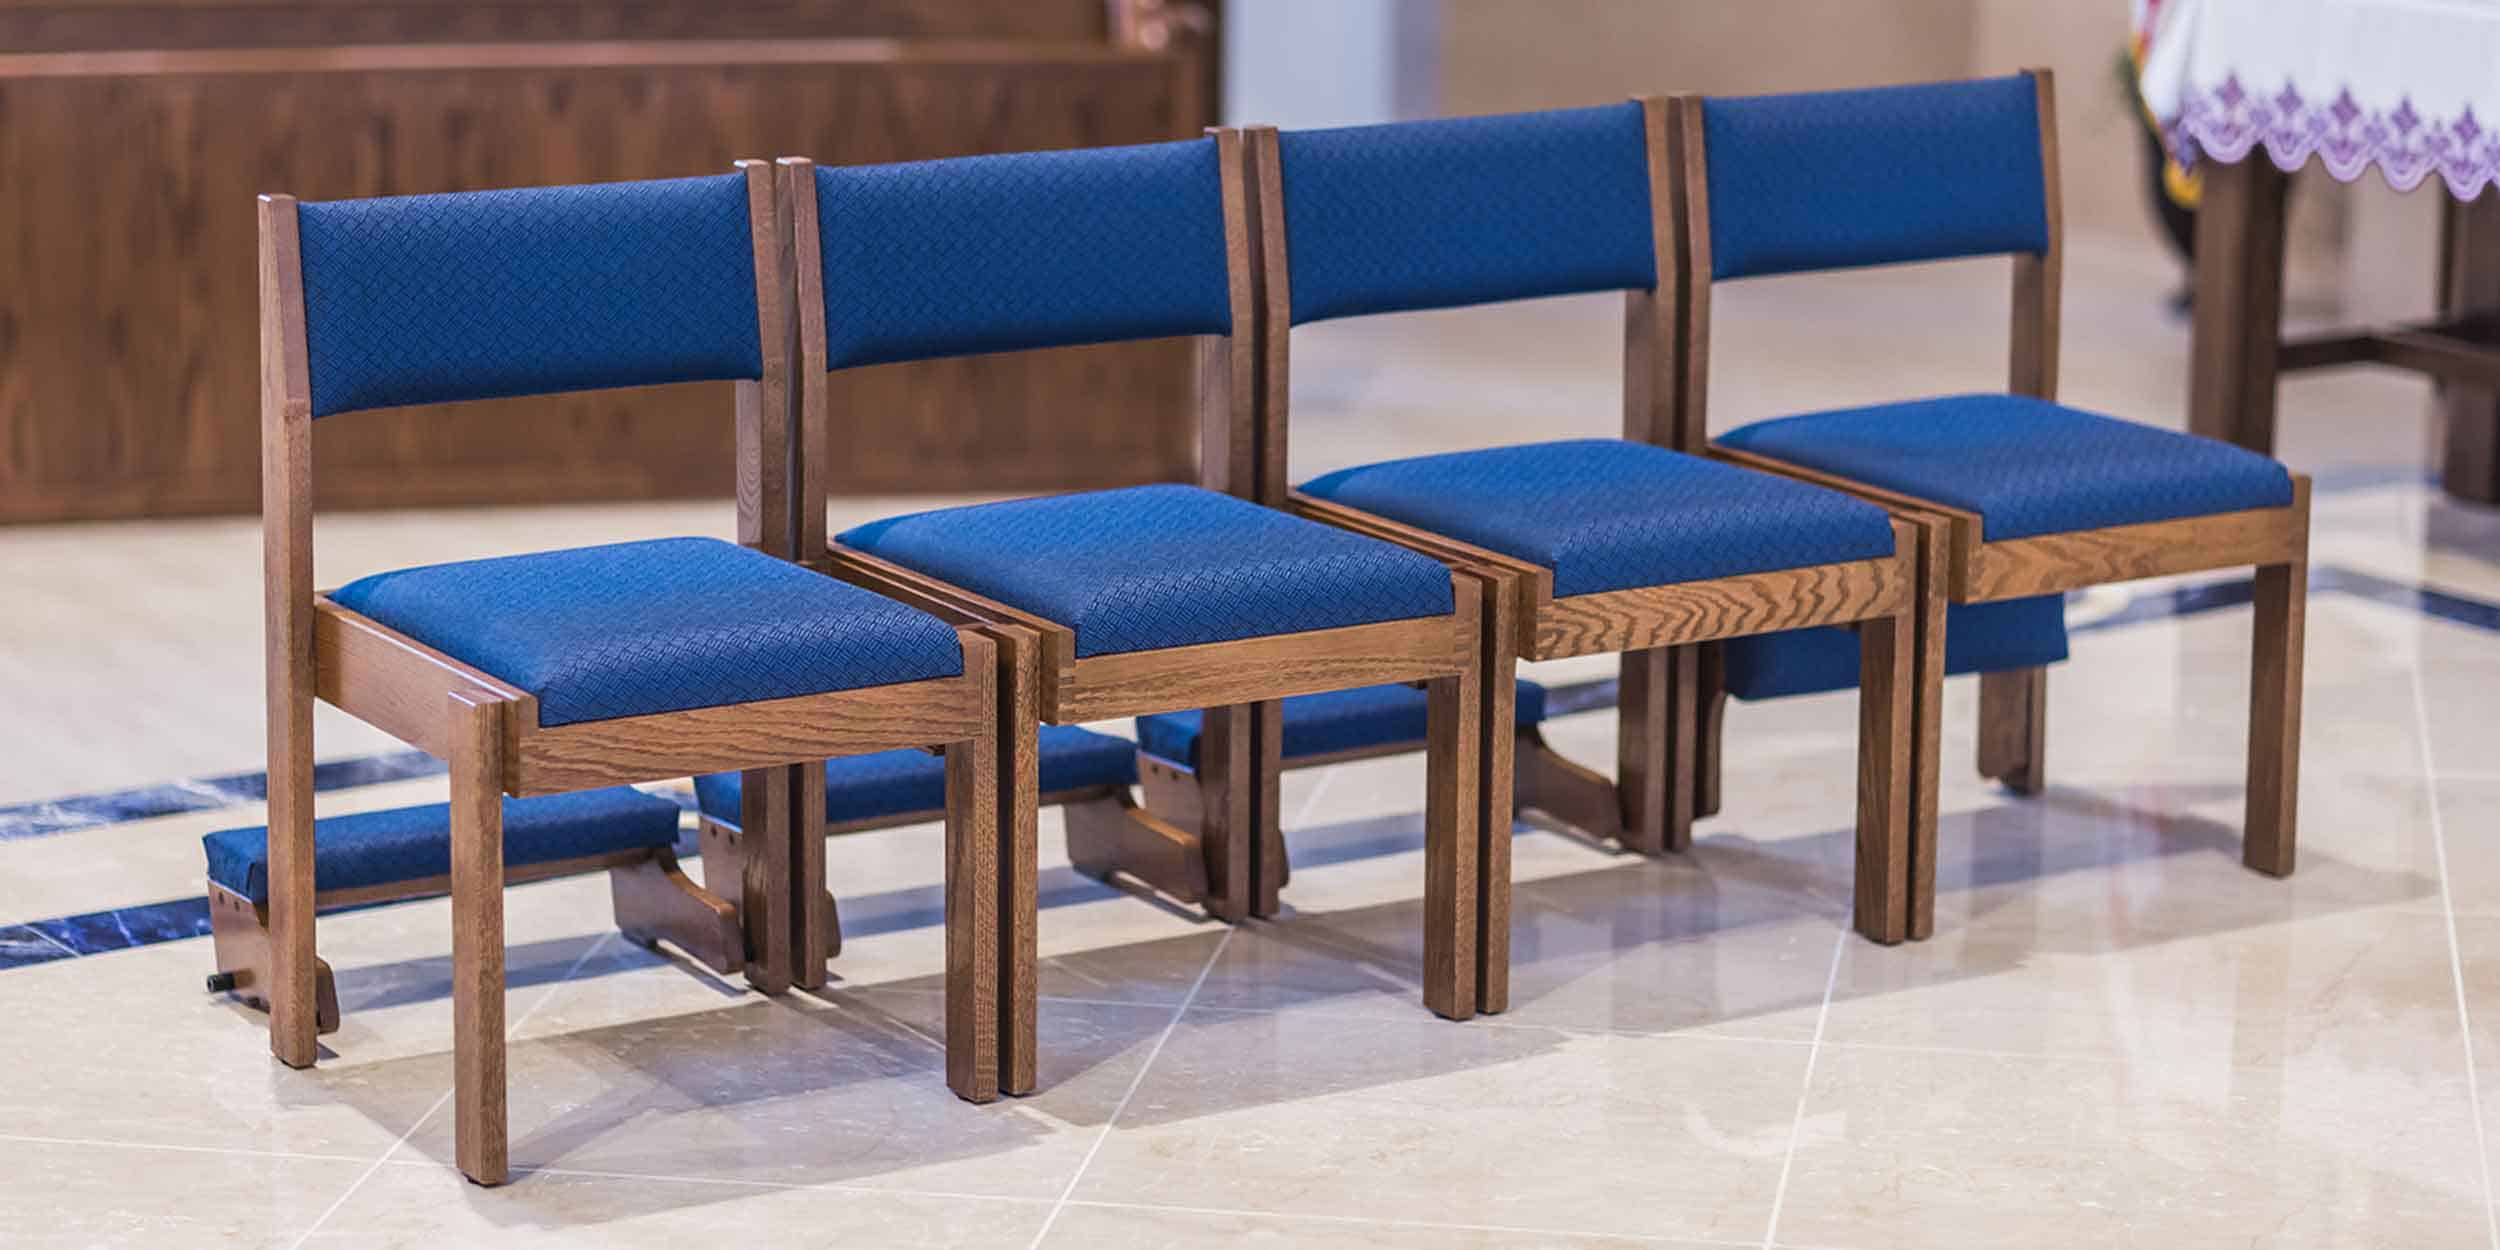 Oaklok Chairs with Kneelers in Row